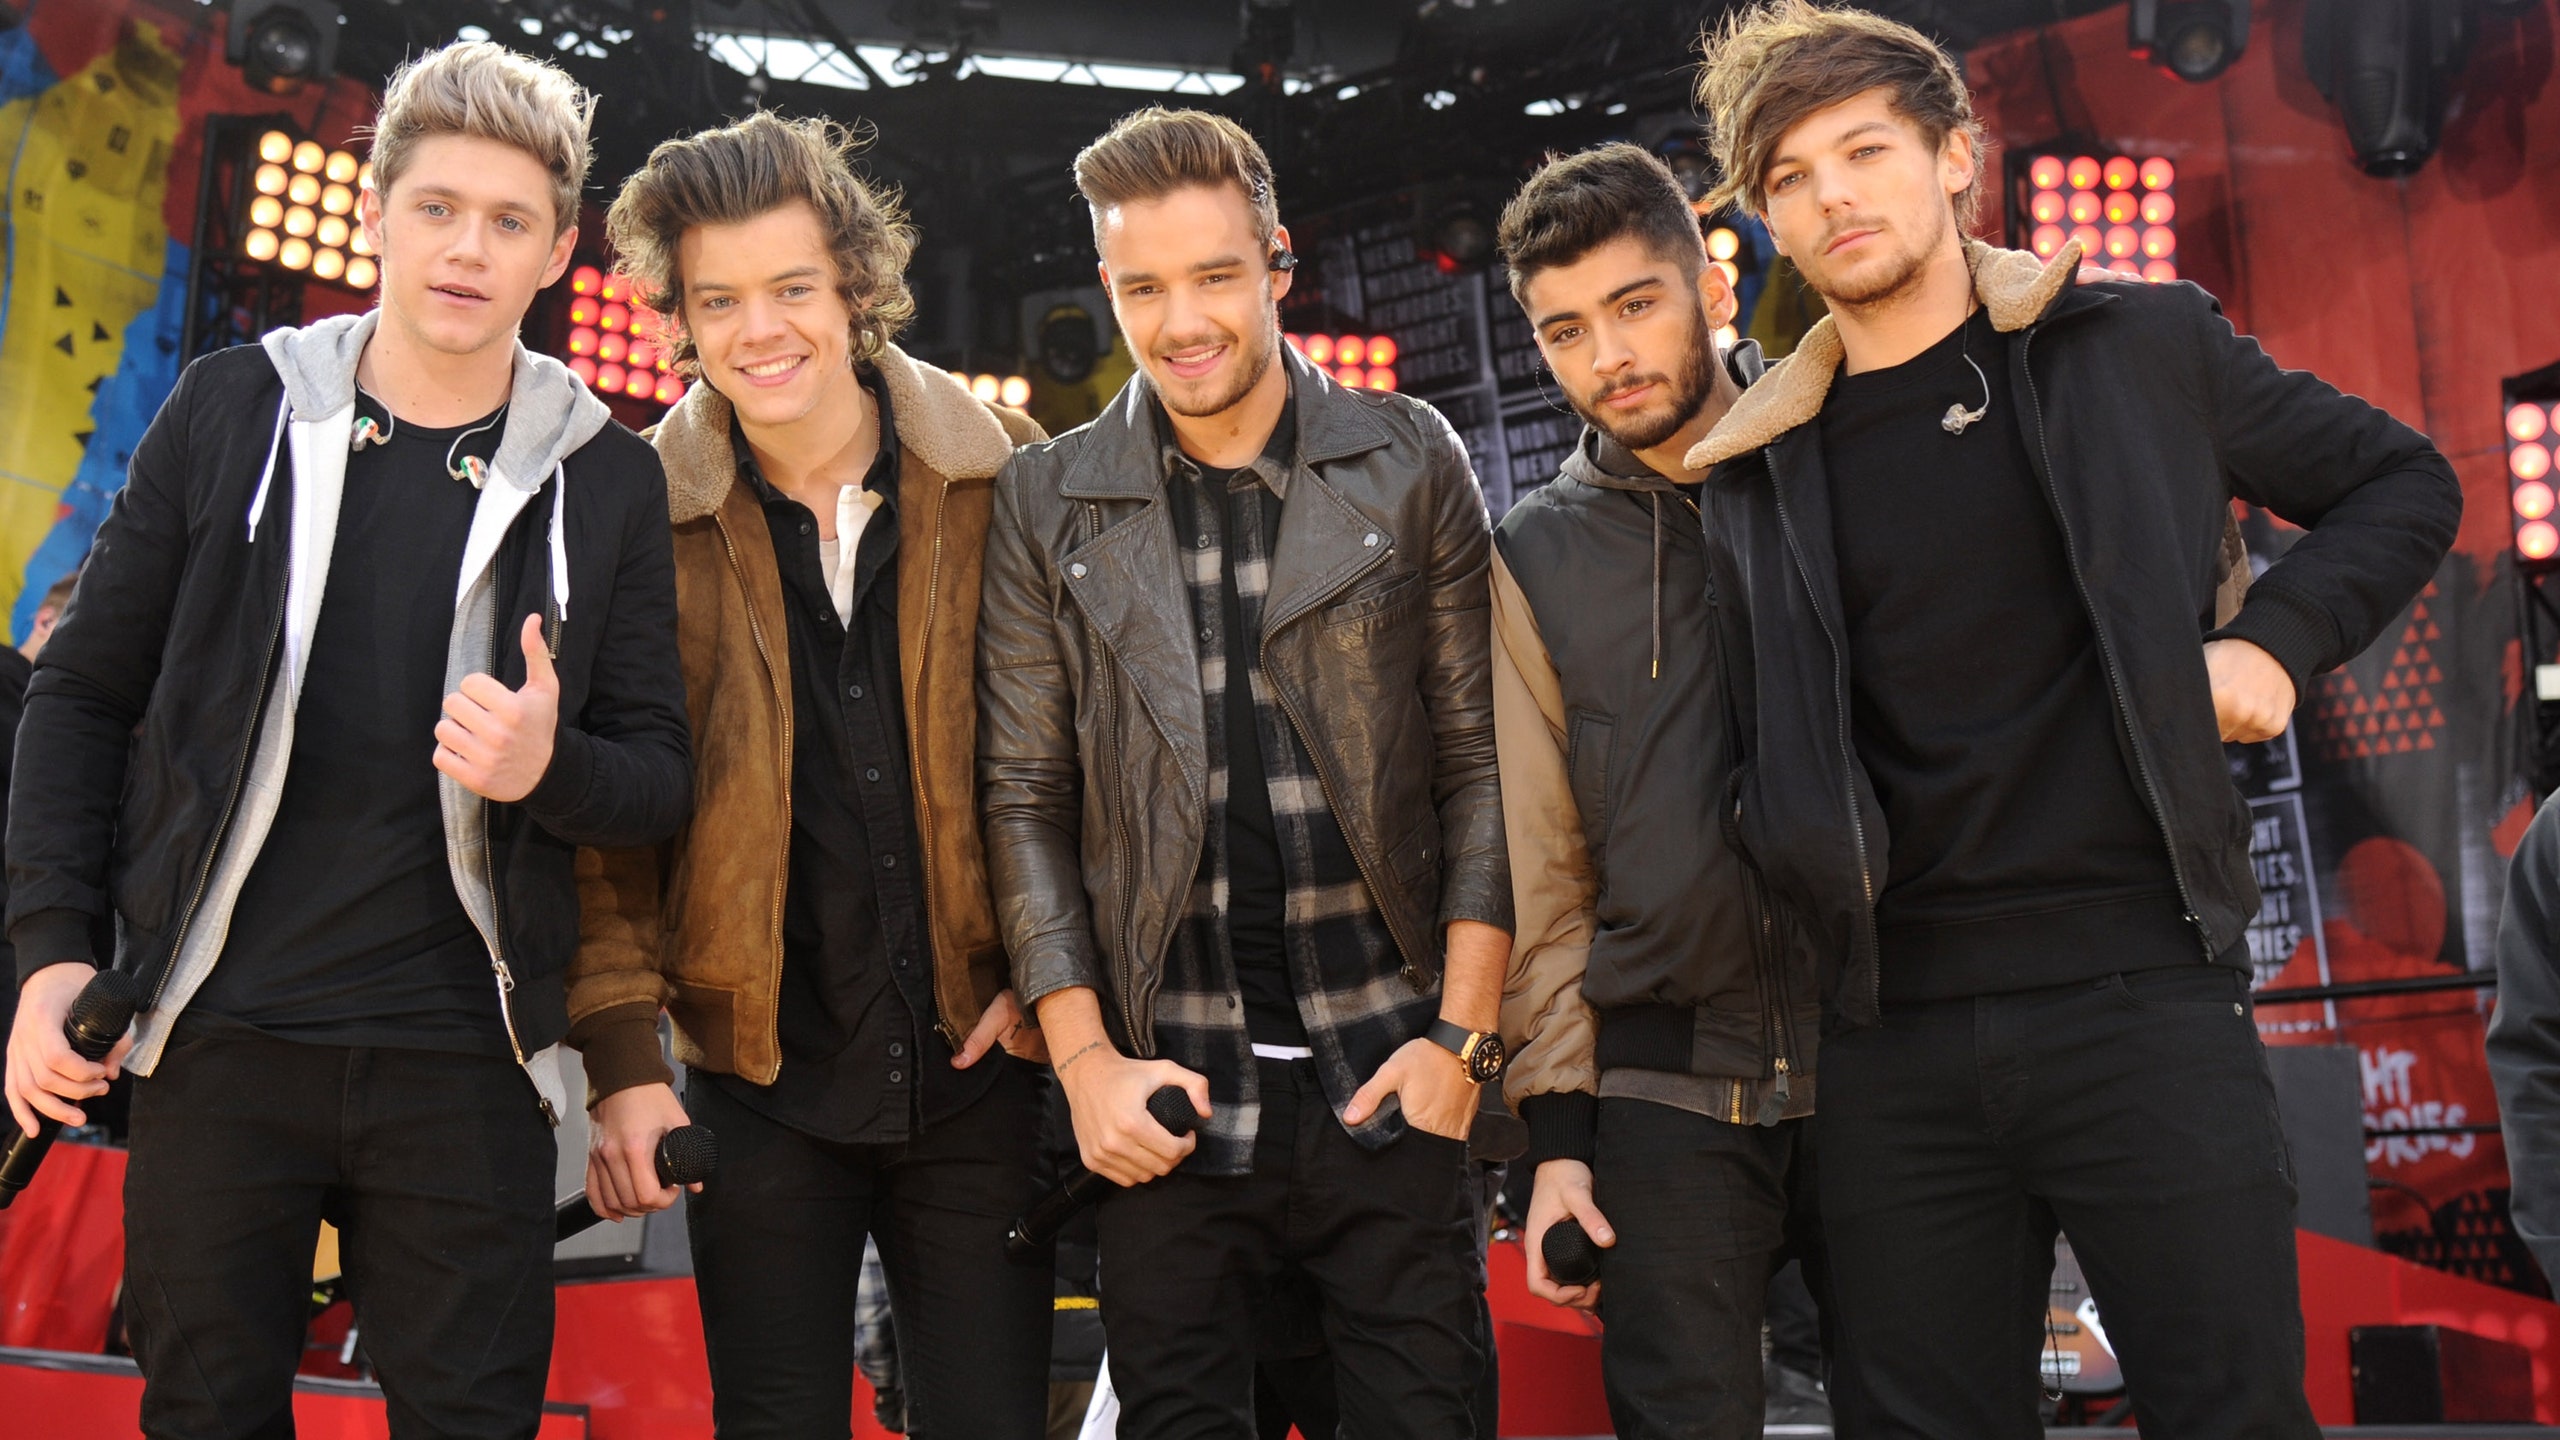 One Direction poses in 2013 for Good Morning America.